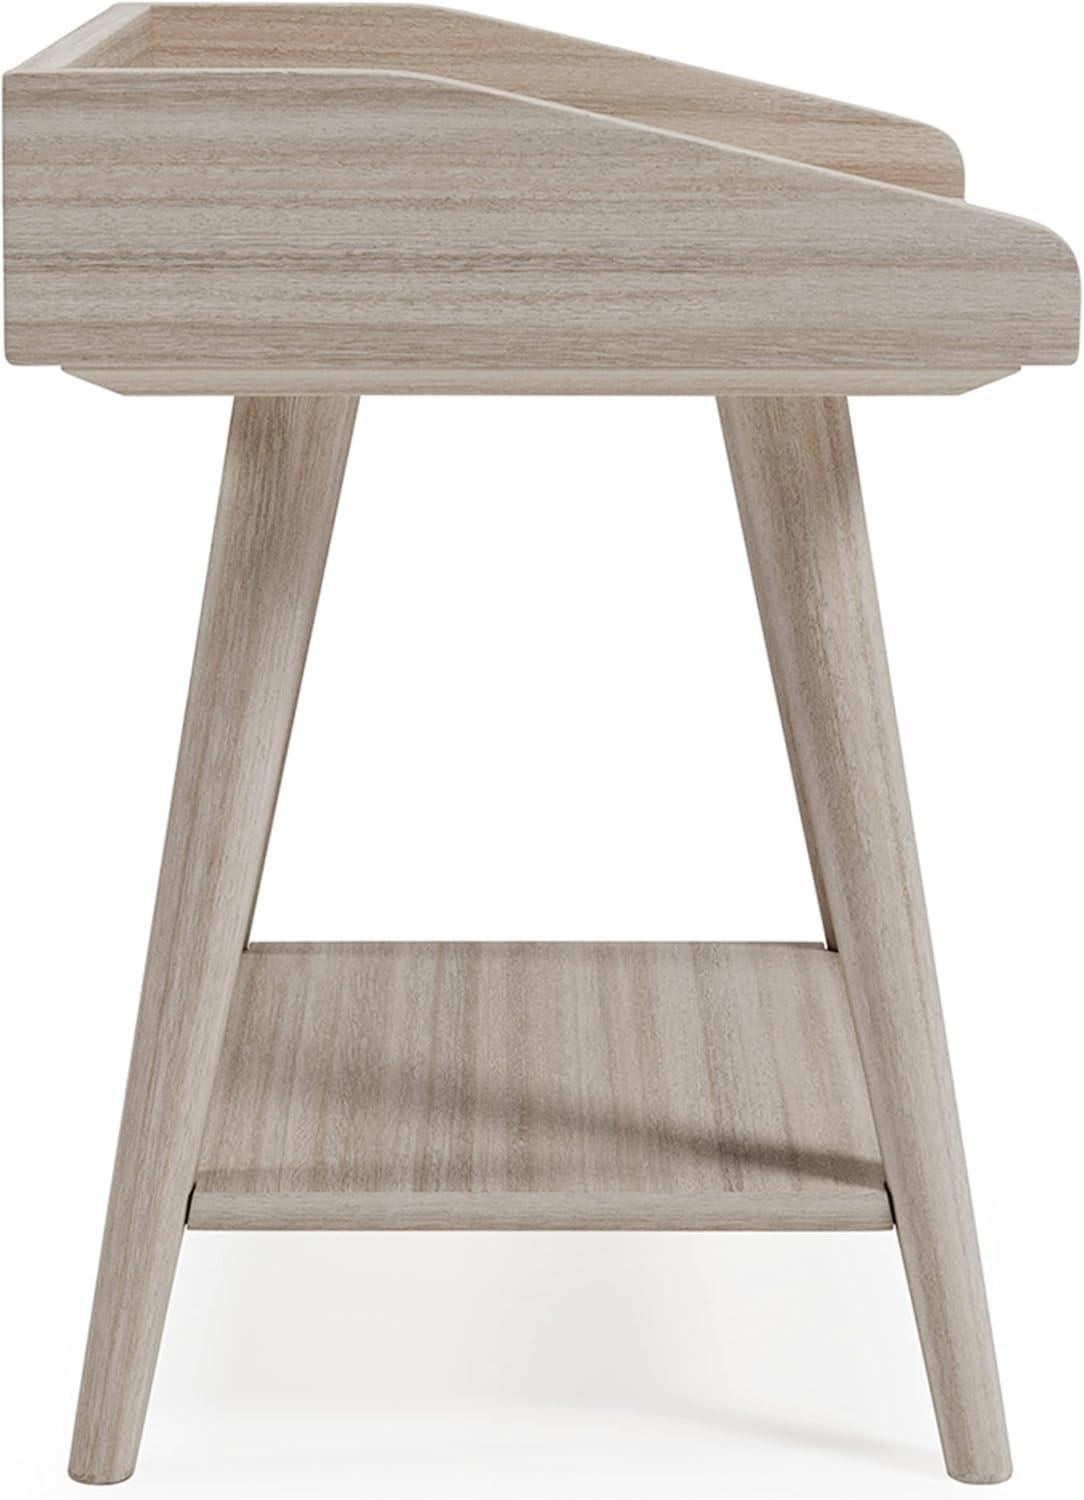 Blariden Transitional Beige Wood Accent Table with USB Chargers